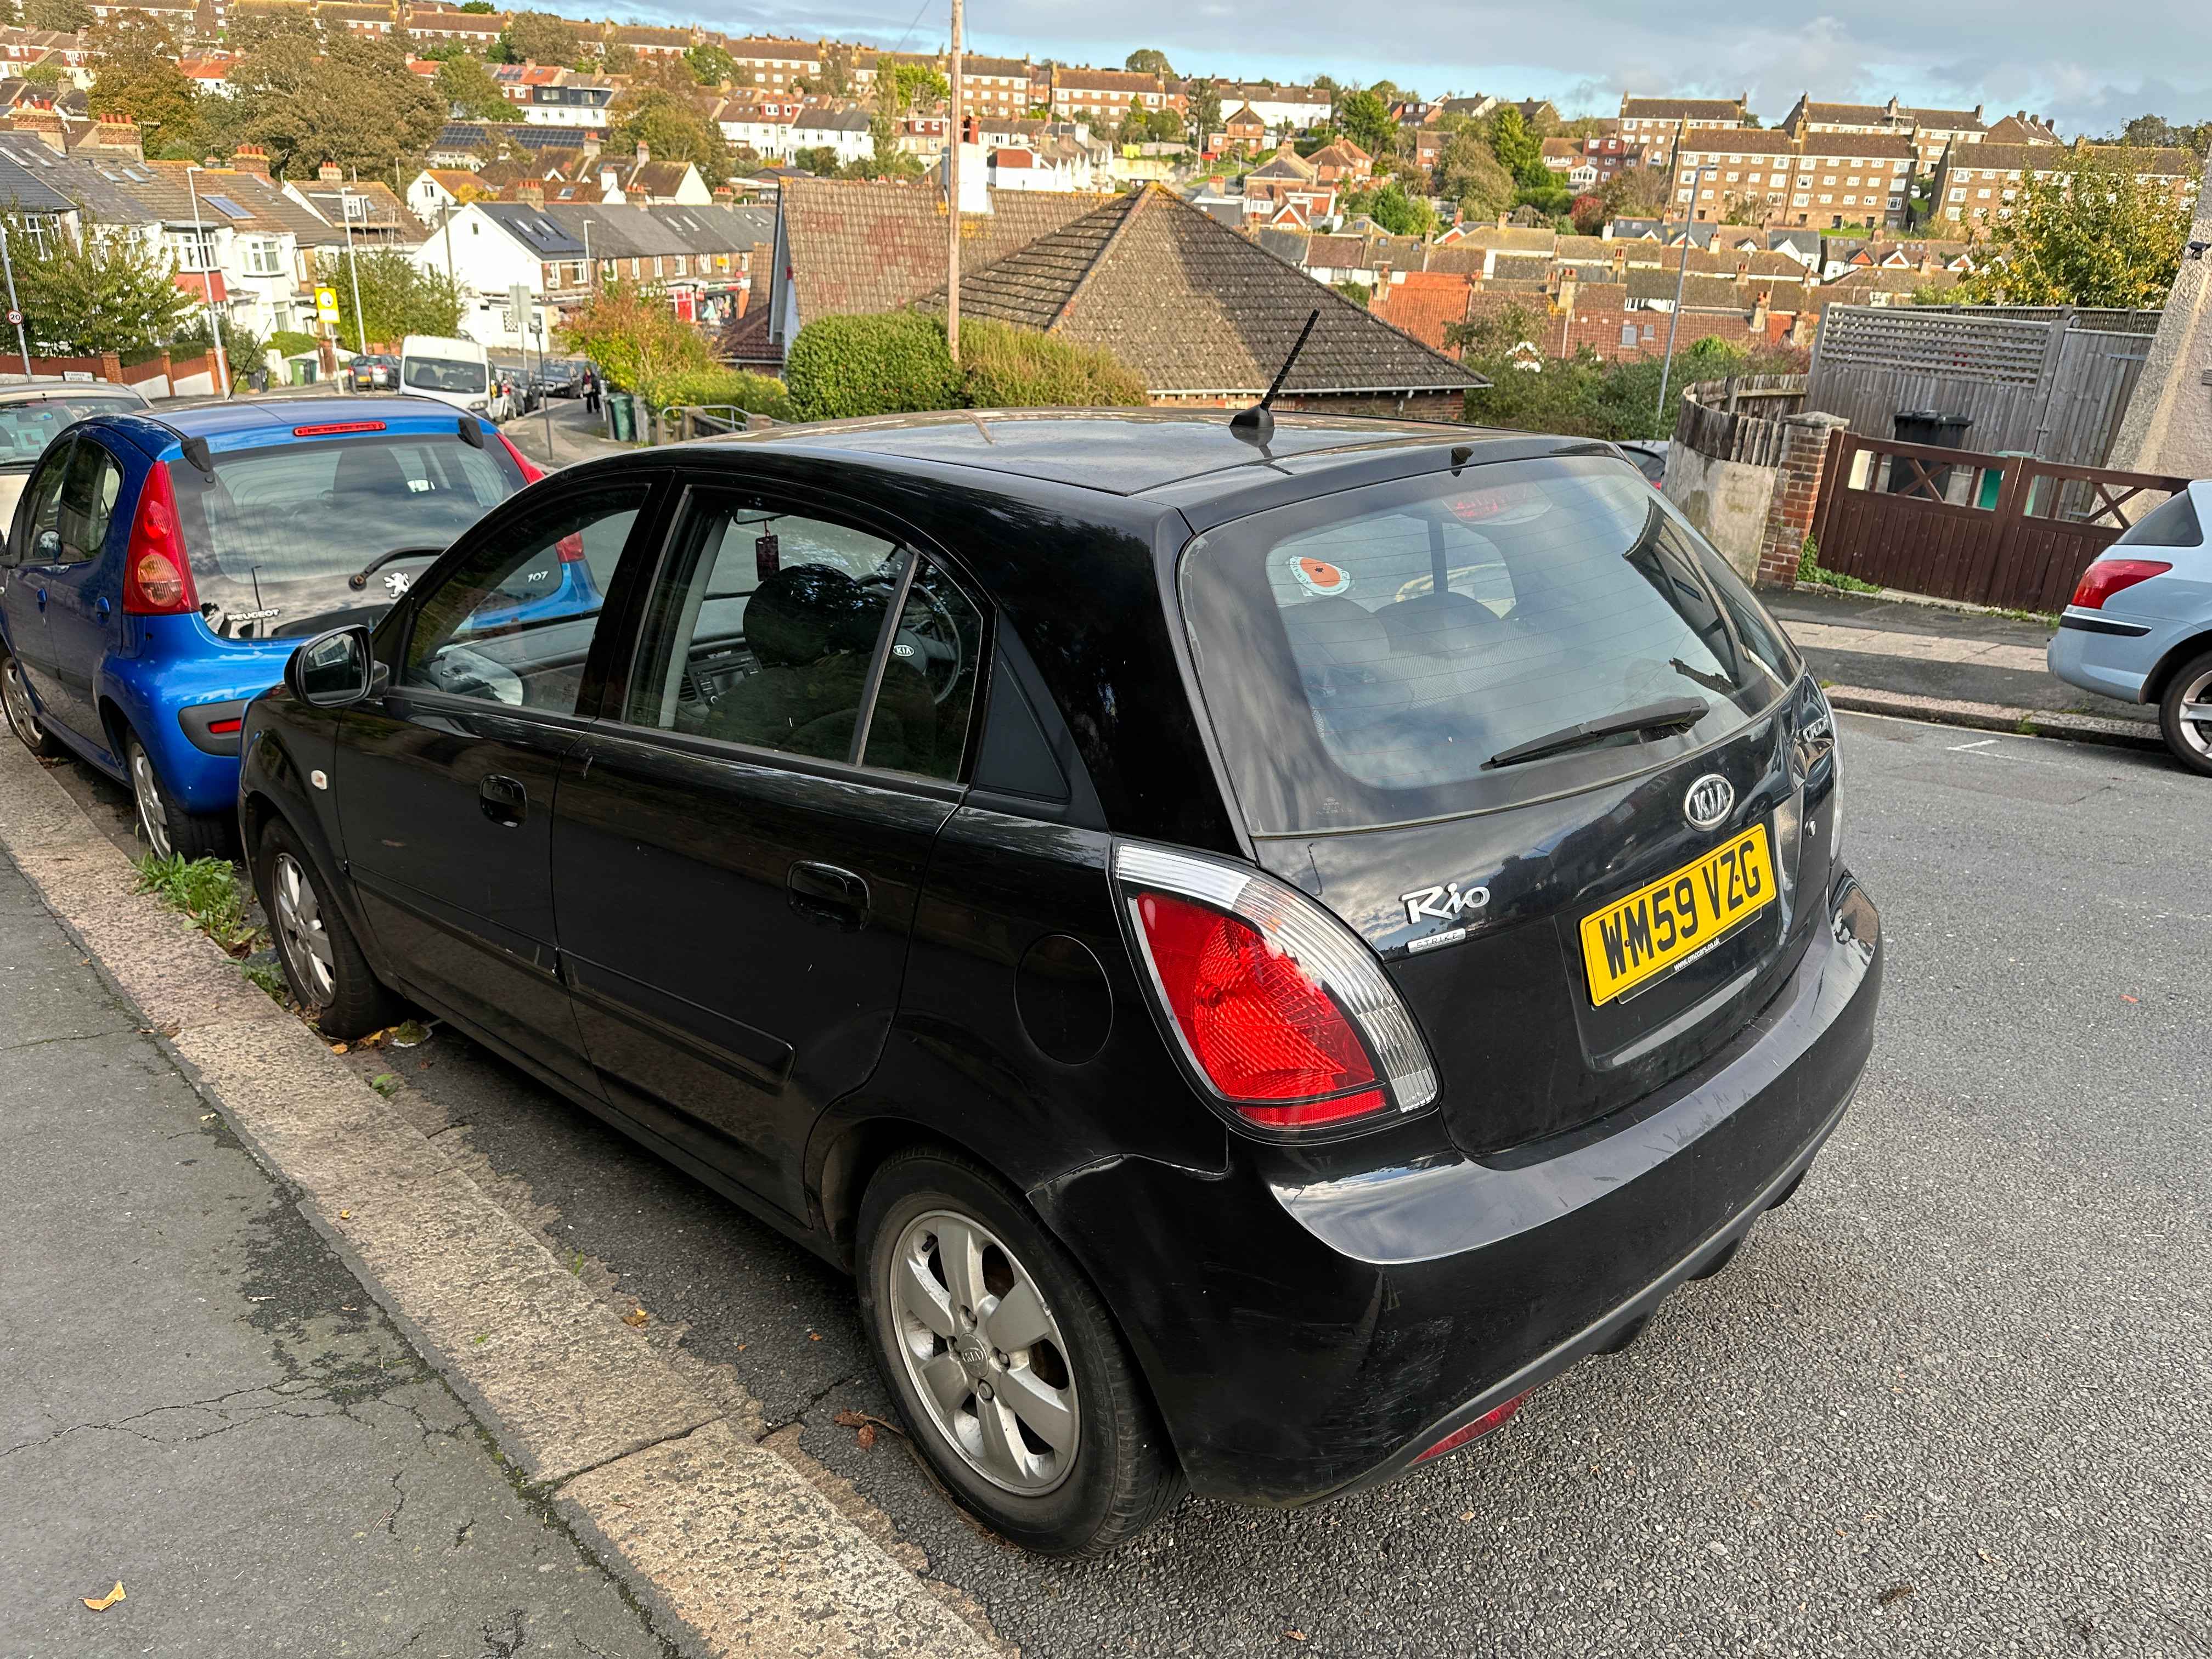 Photograph of WM59 VZG - a Black Kia Rio parked in Hollingdean by a non-resident. The second of four photographs supplied by the residents of Hollingdean.